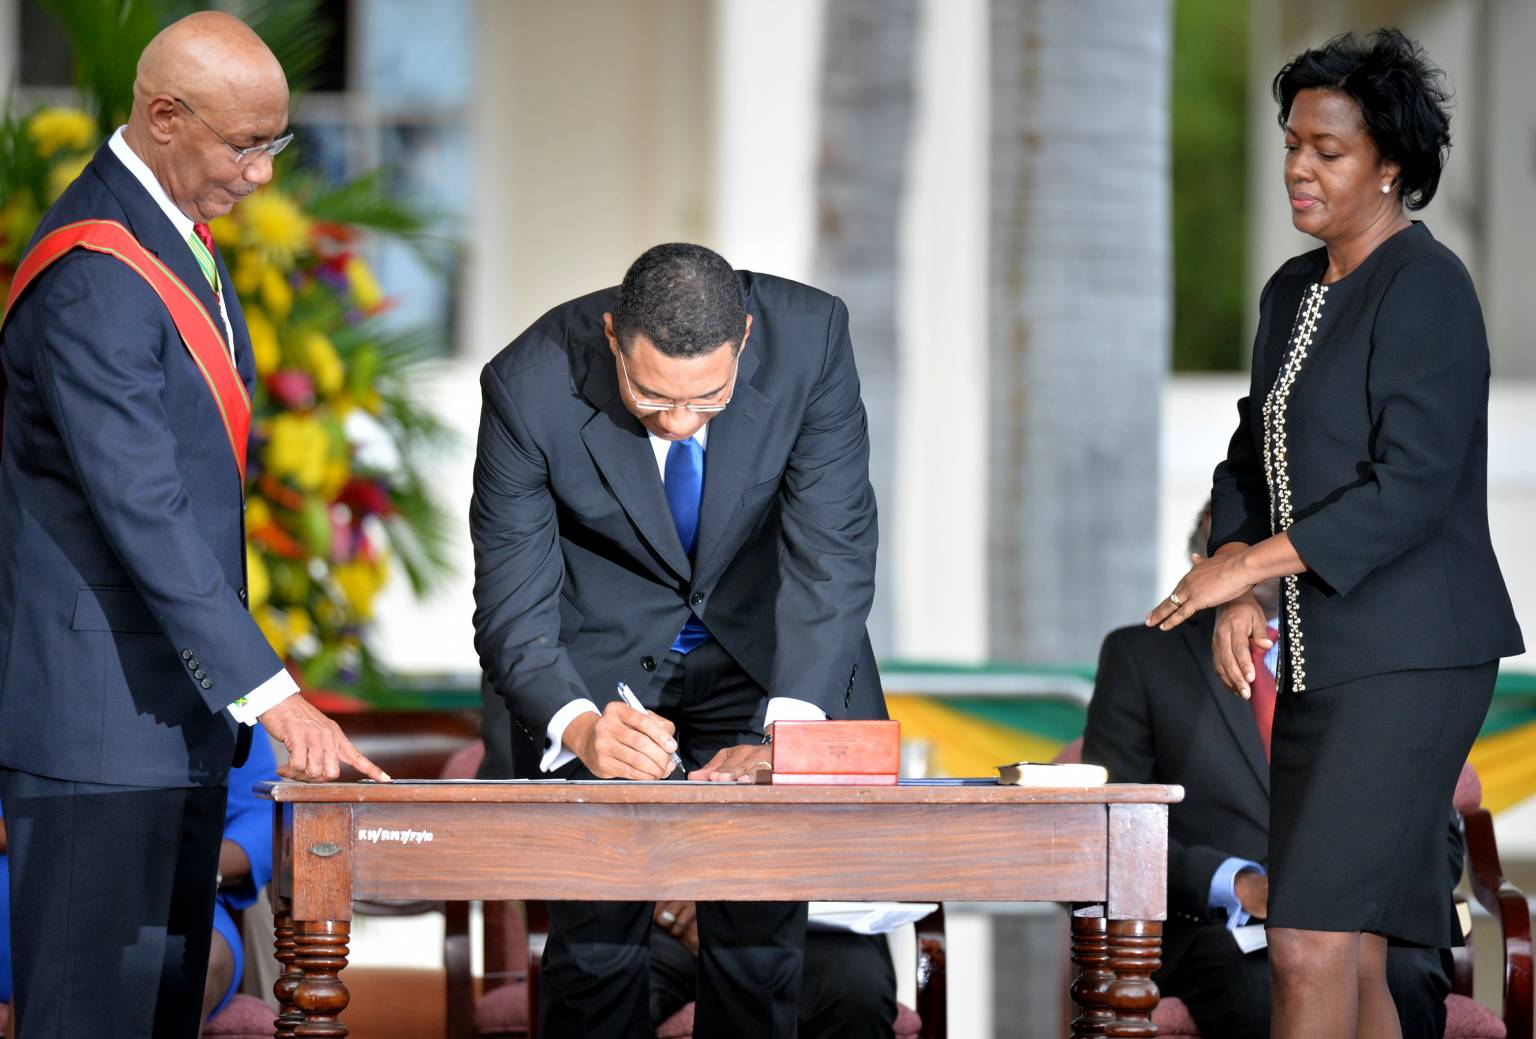 Prime Minister Andrew Holness Pledges A Government Of Partnership